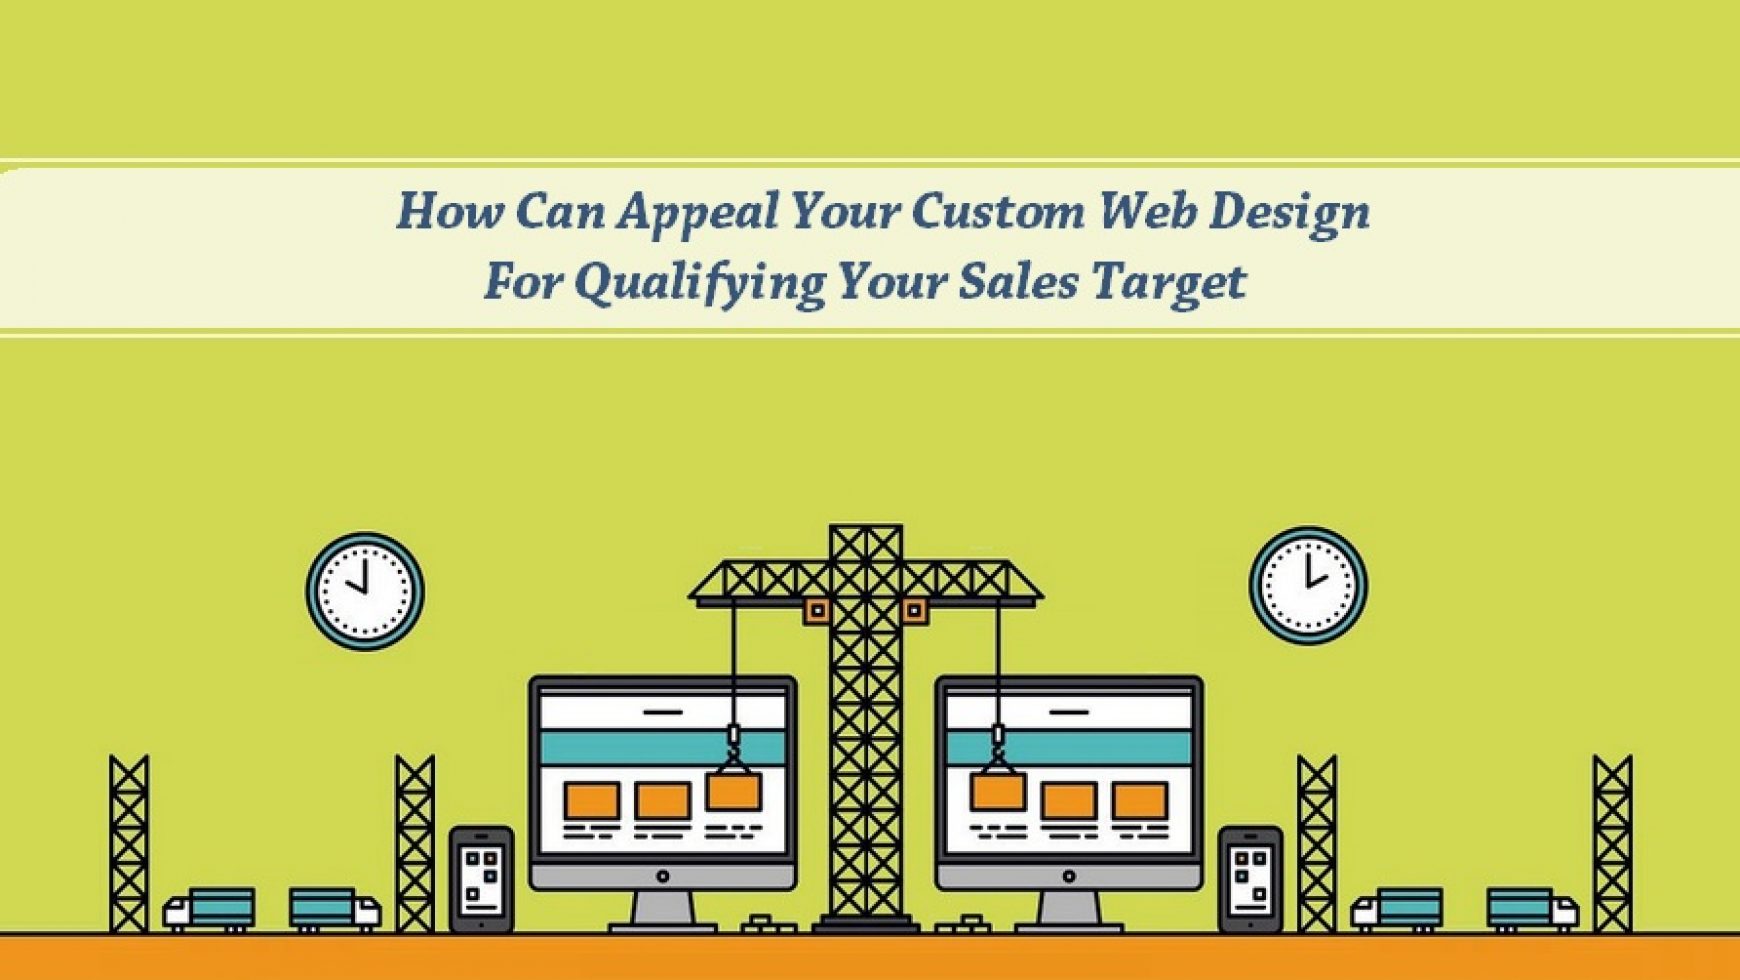 How Can Appeal Your Custom Web Design For Qualifying Your Sales Target